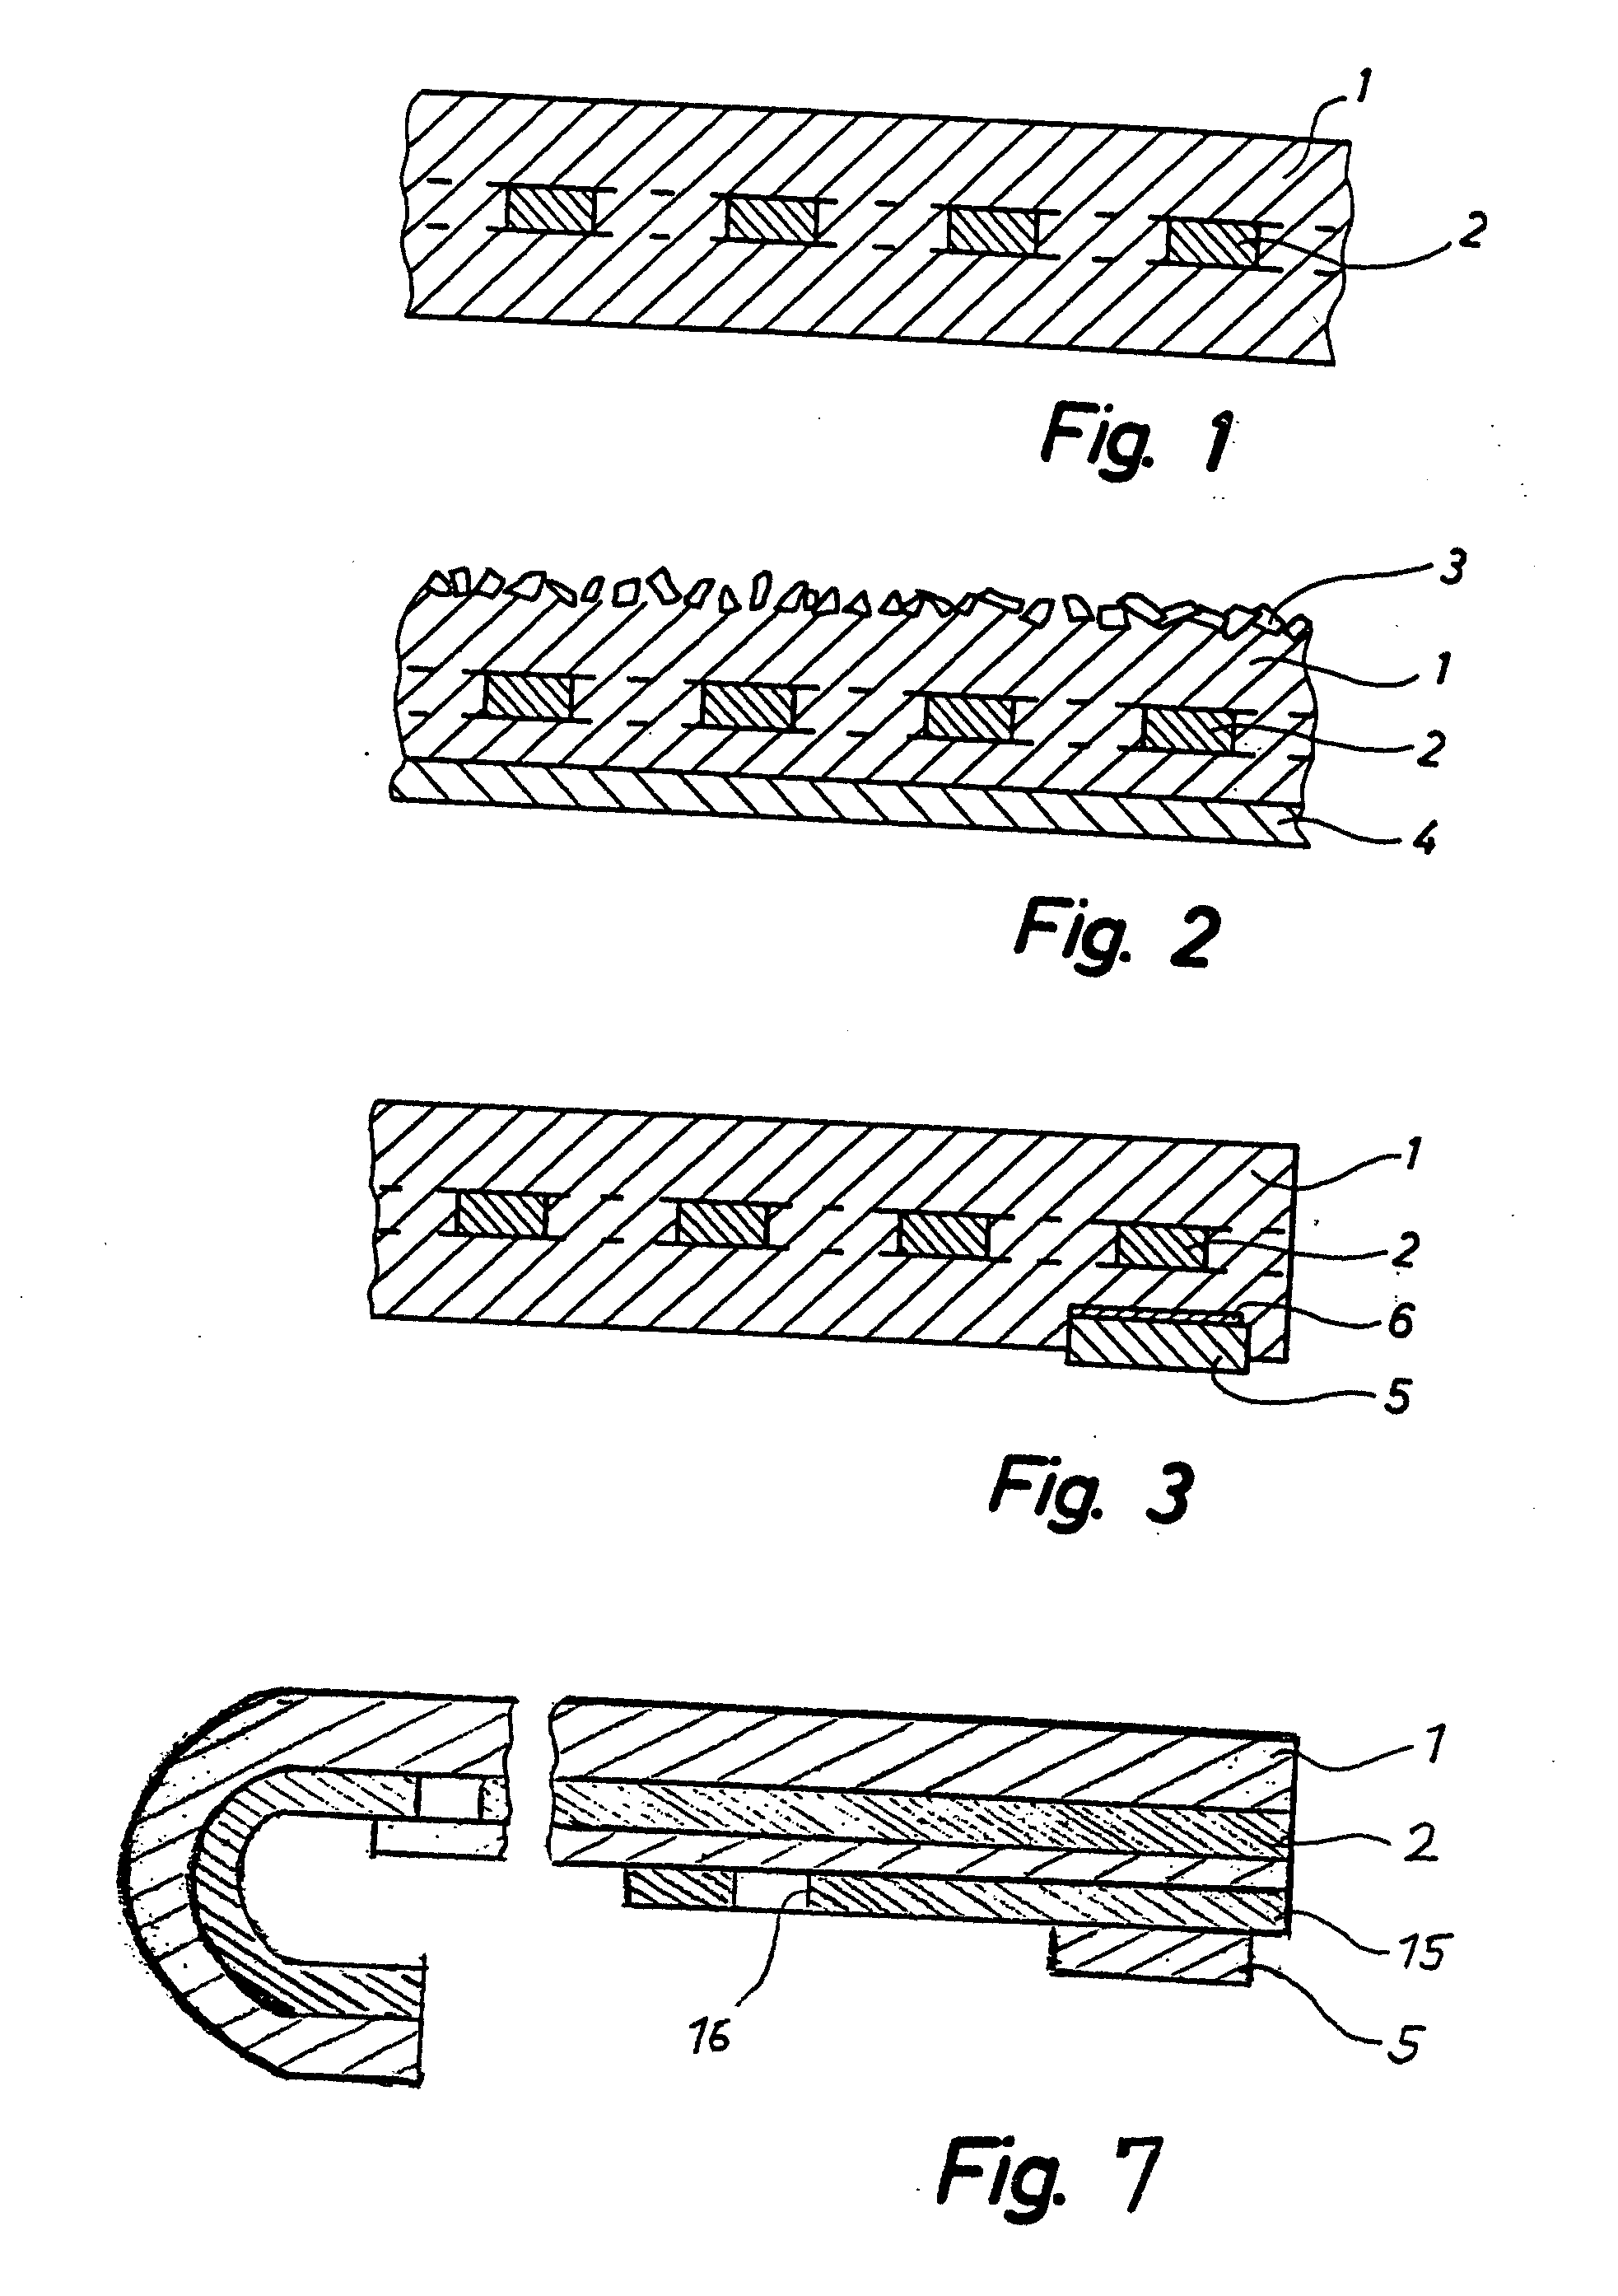 Plate-shaped cover material